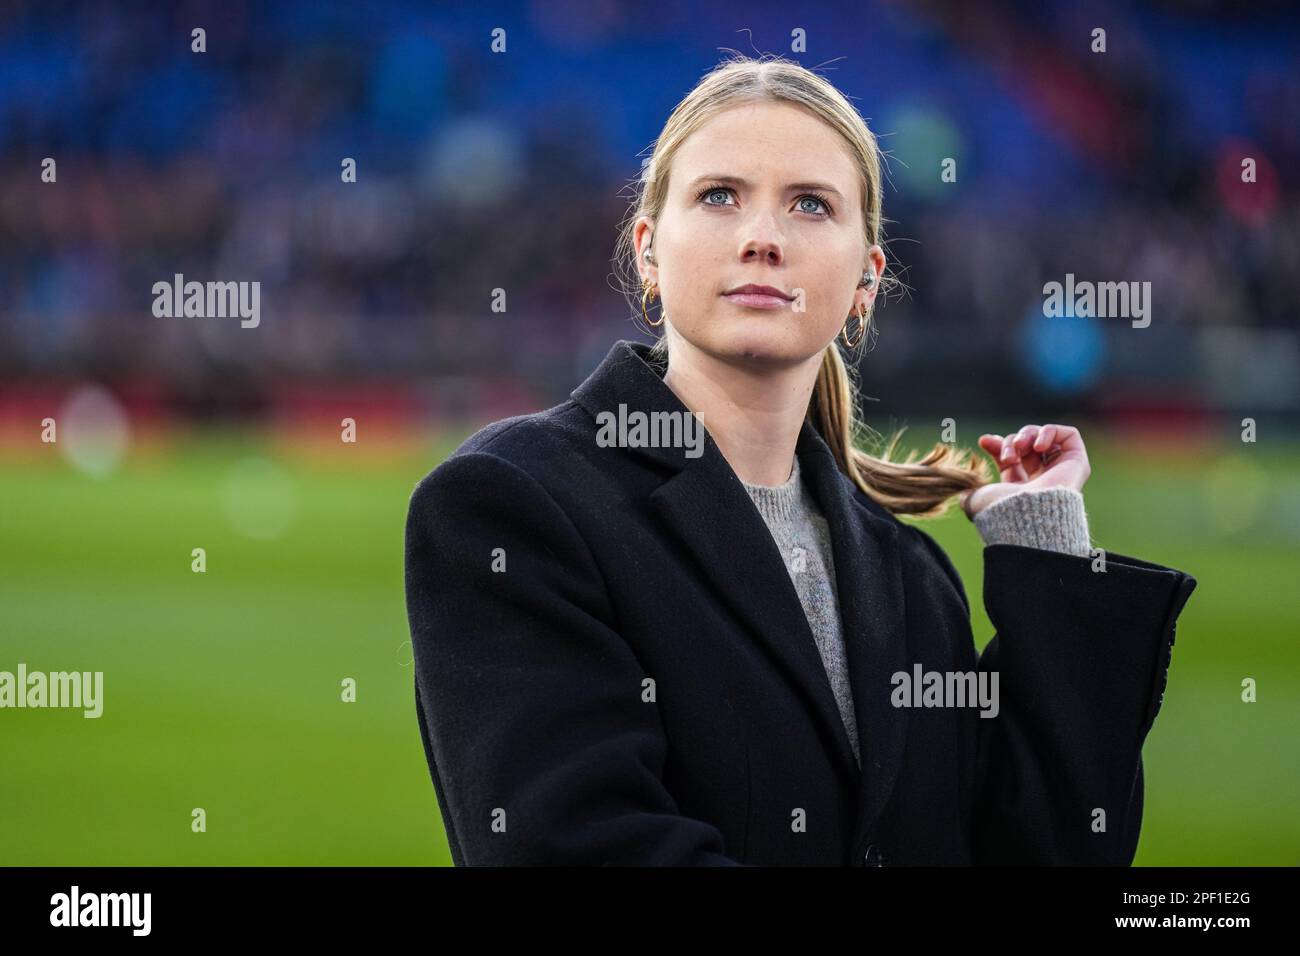 Rotterdam - Noa Vahle during the match between Feyenoord v Shakhtar Donetsk at Stadion Feijenoord De Kuip on 16 March 2023 in Rotterdam, the Netherlands. (Box to Box Pictures/Yannick Verhoeven) Stock Photo